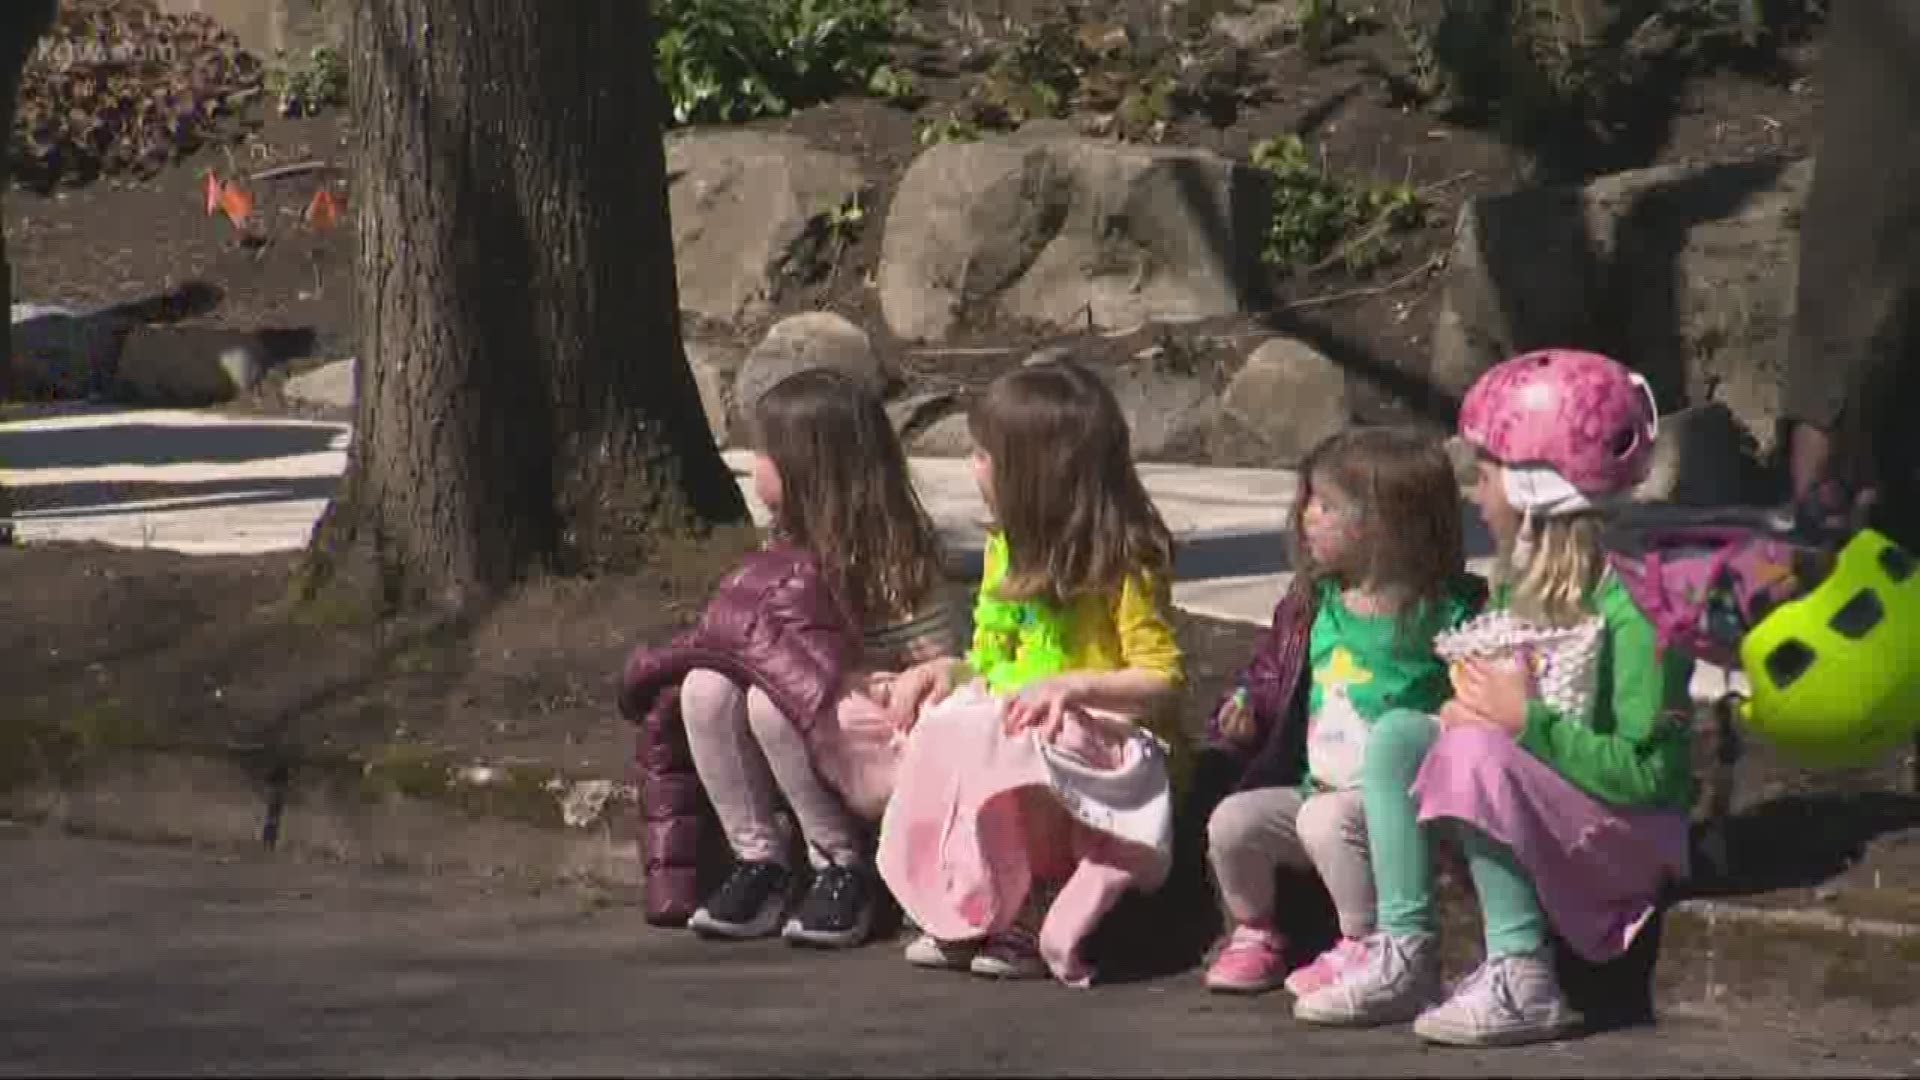 A St. Patrick’s Day tradition in Northeast Portland is celebrating a big milestone. A neighborhood parade that started as a small event has grown to attract huge crowds, and is now marking its 30th year.